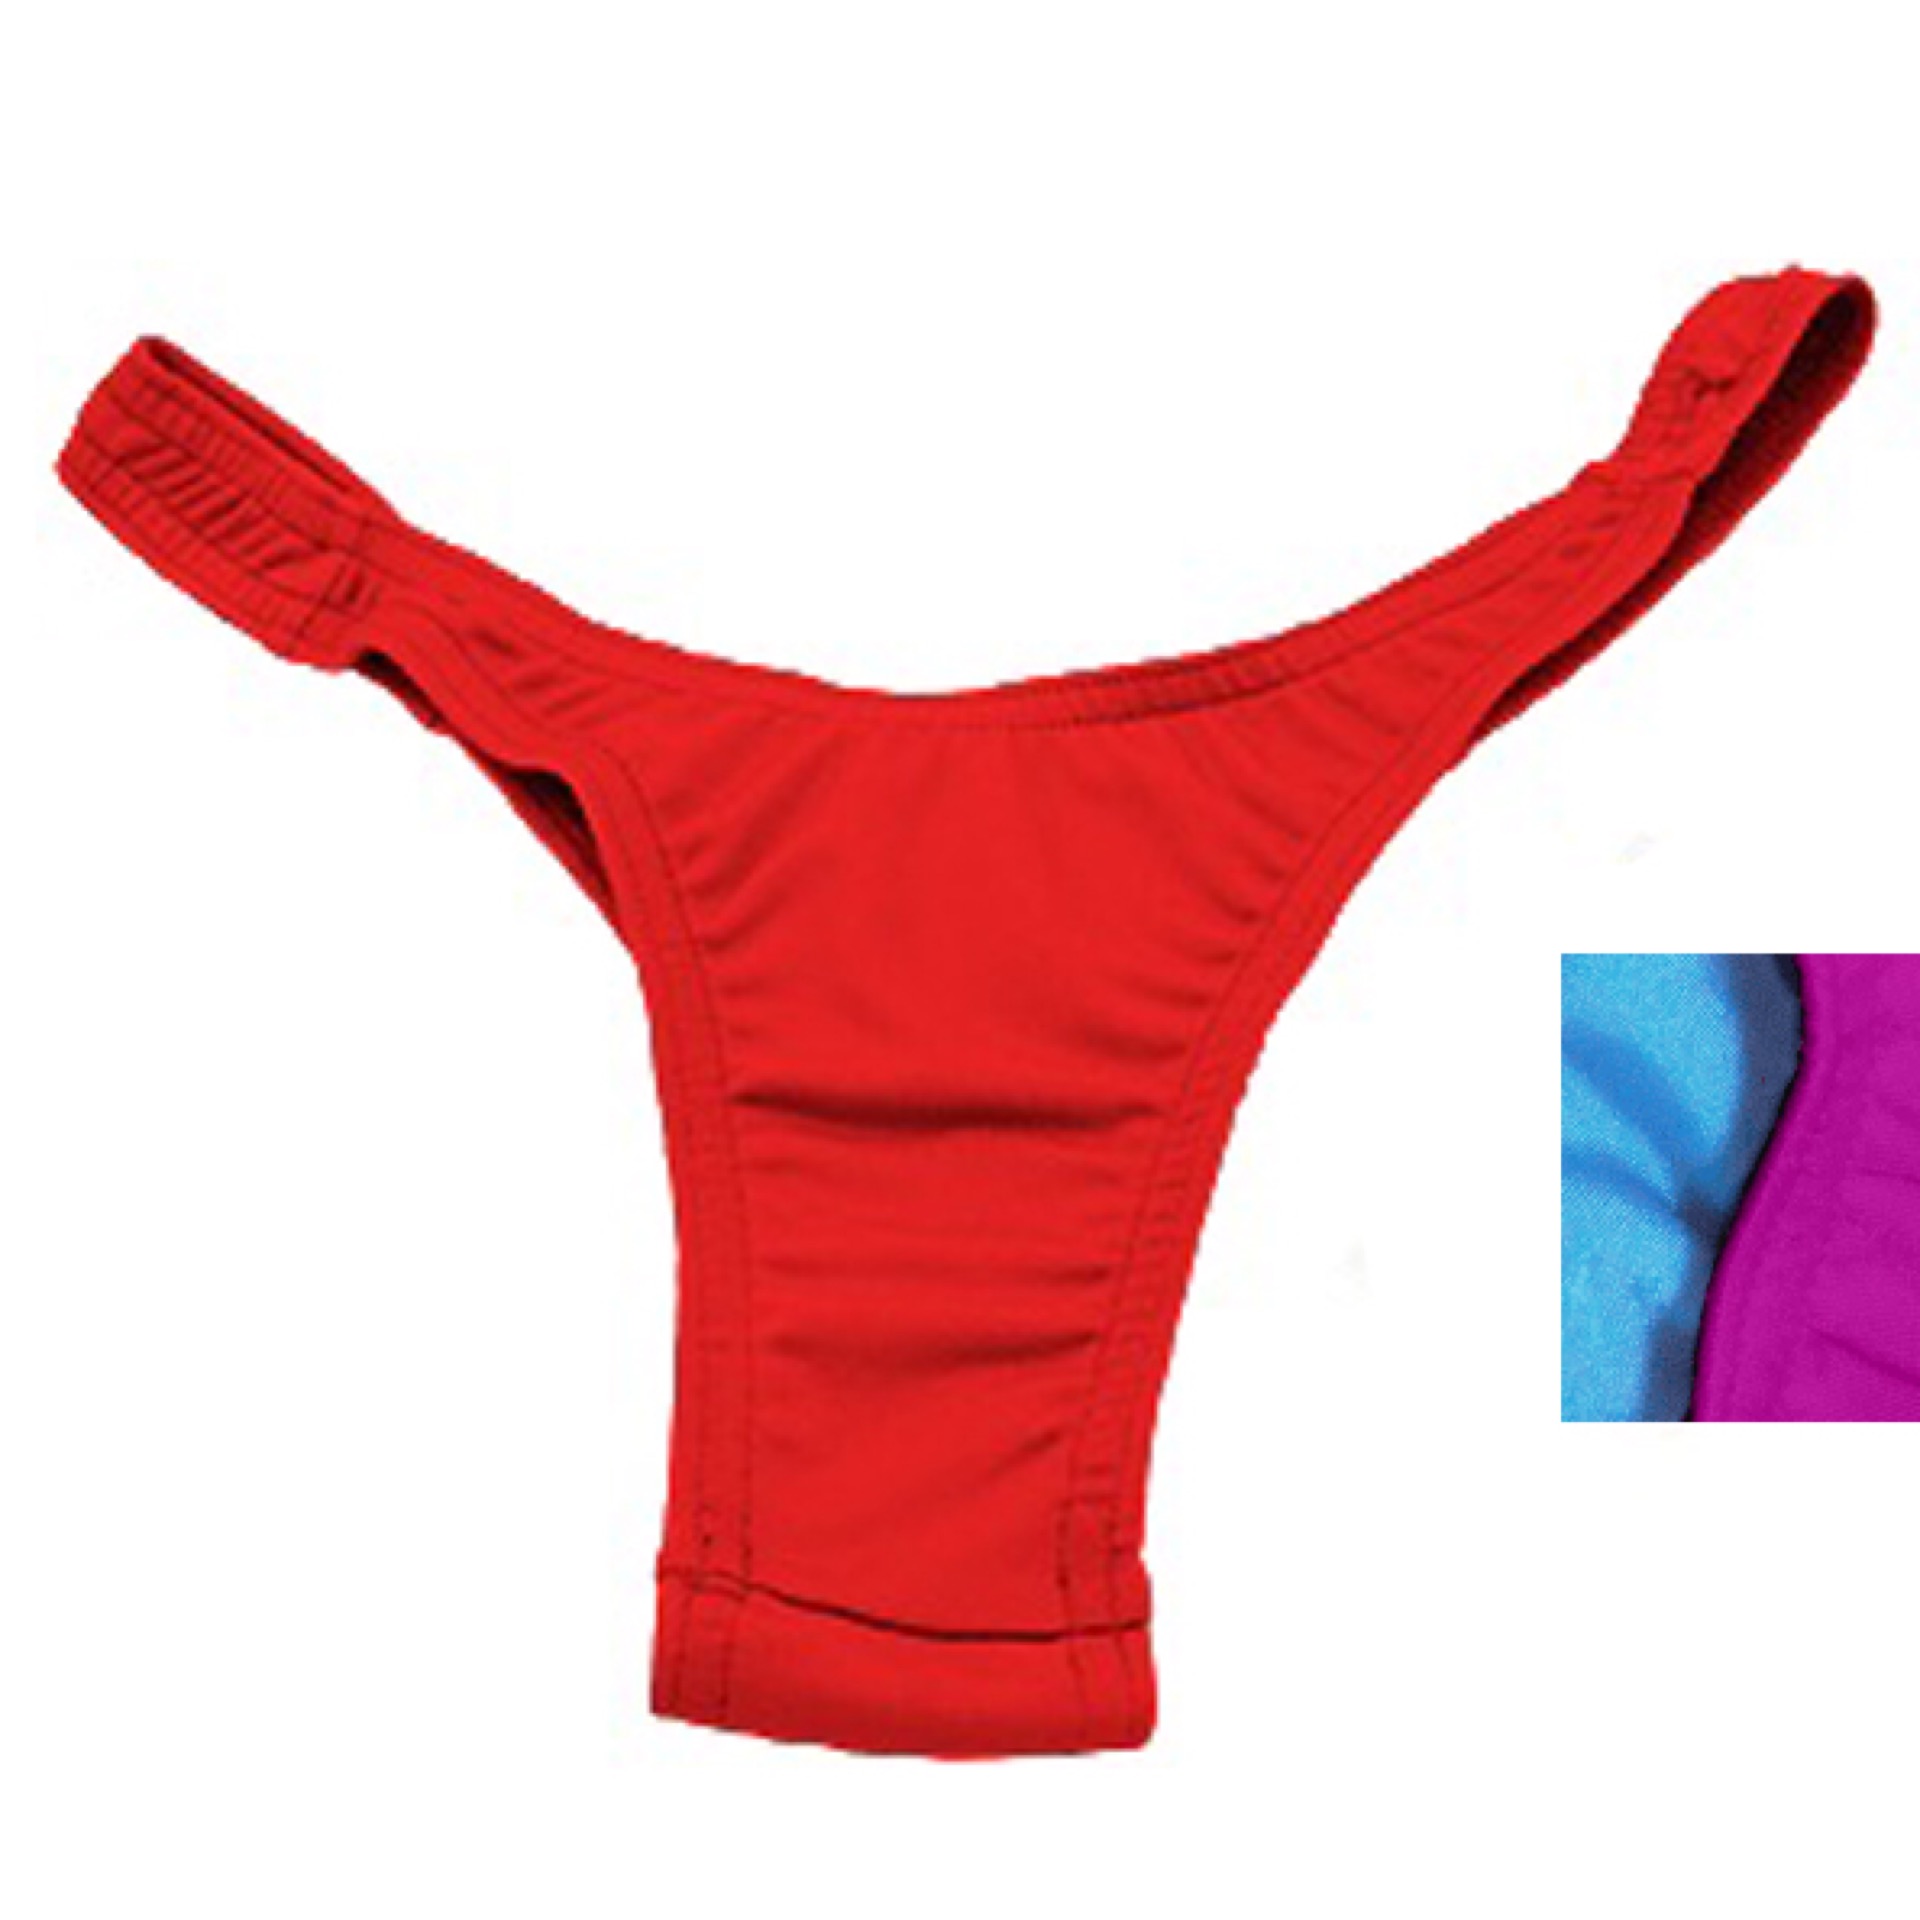 Product image of the luxury gaff. It is shaped like thong underwear with a wider centre strap. The pictured one is bright red.